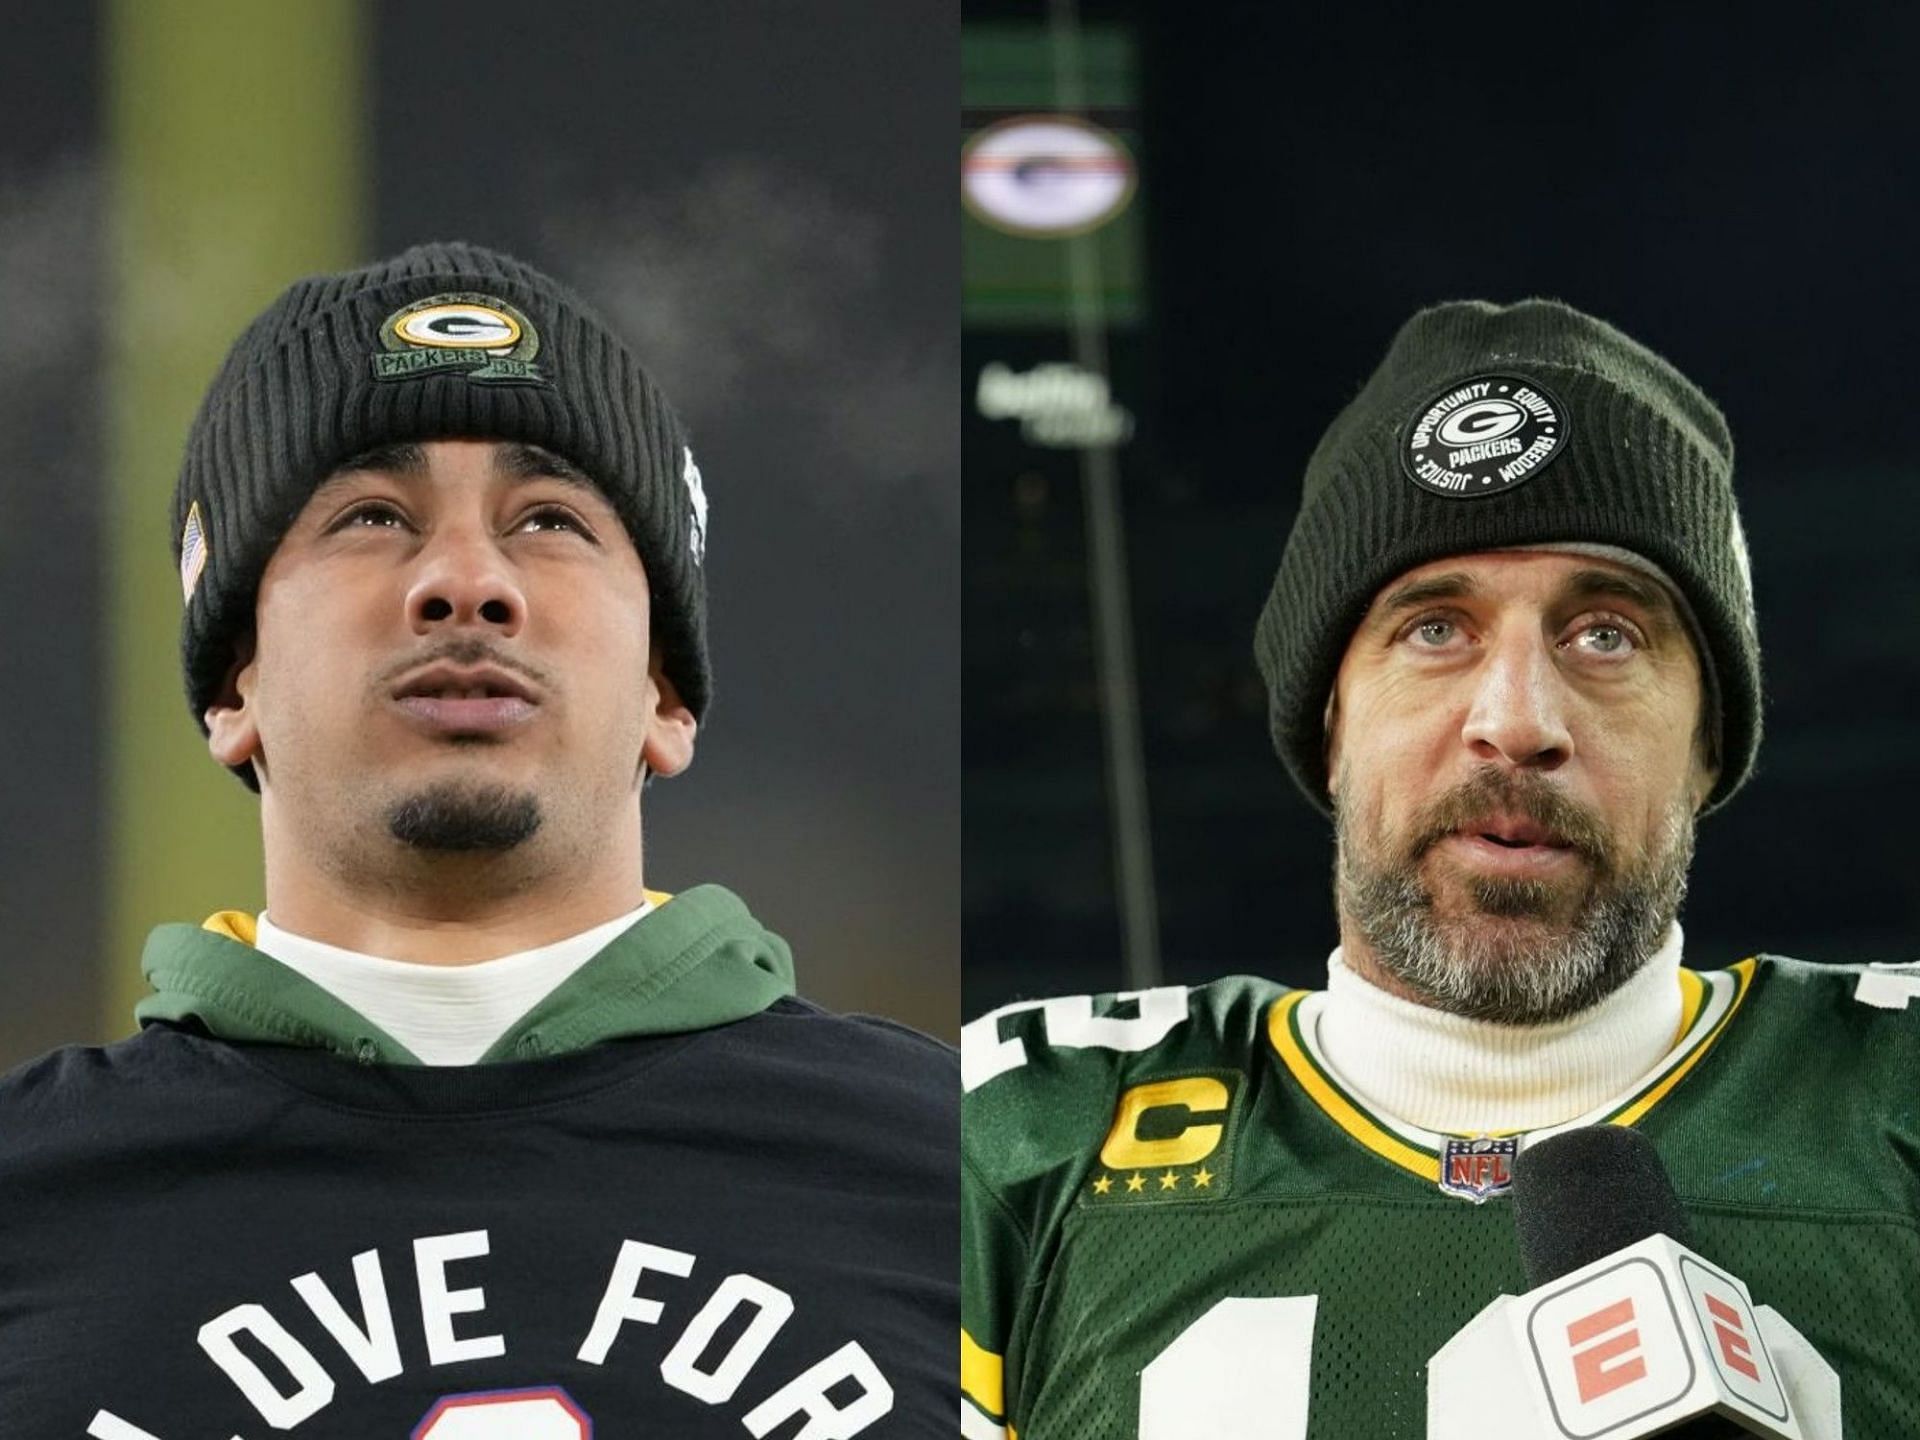 Everything is on the table with Aaron Rodgers, Jordan Love and the Packers in 2023